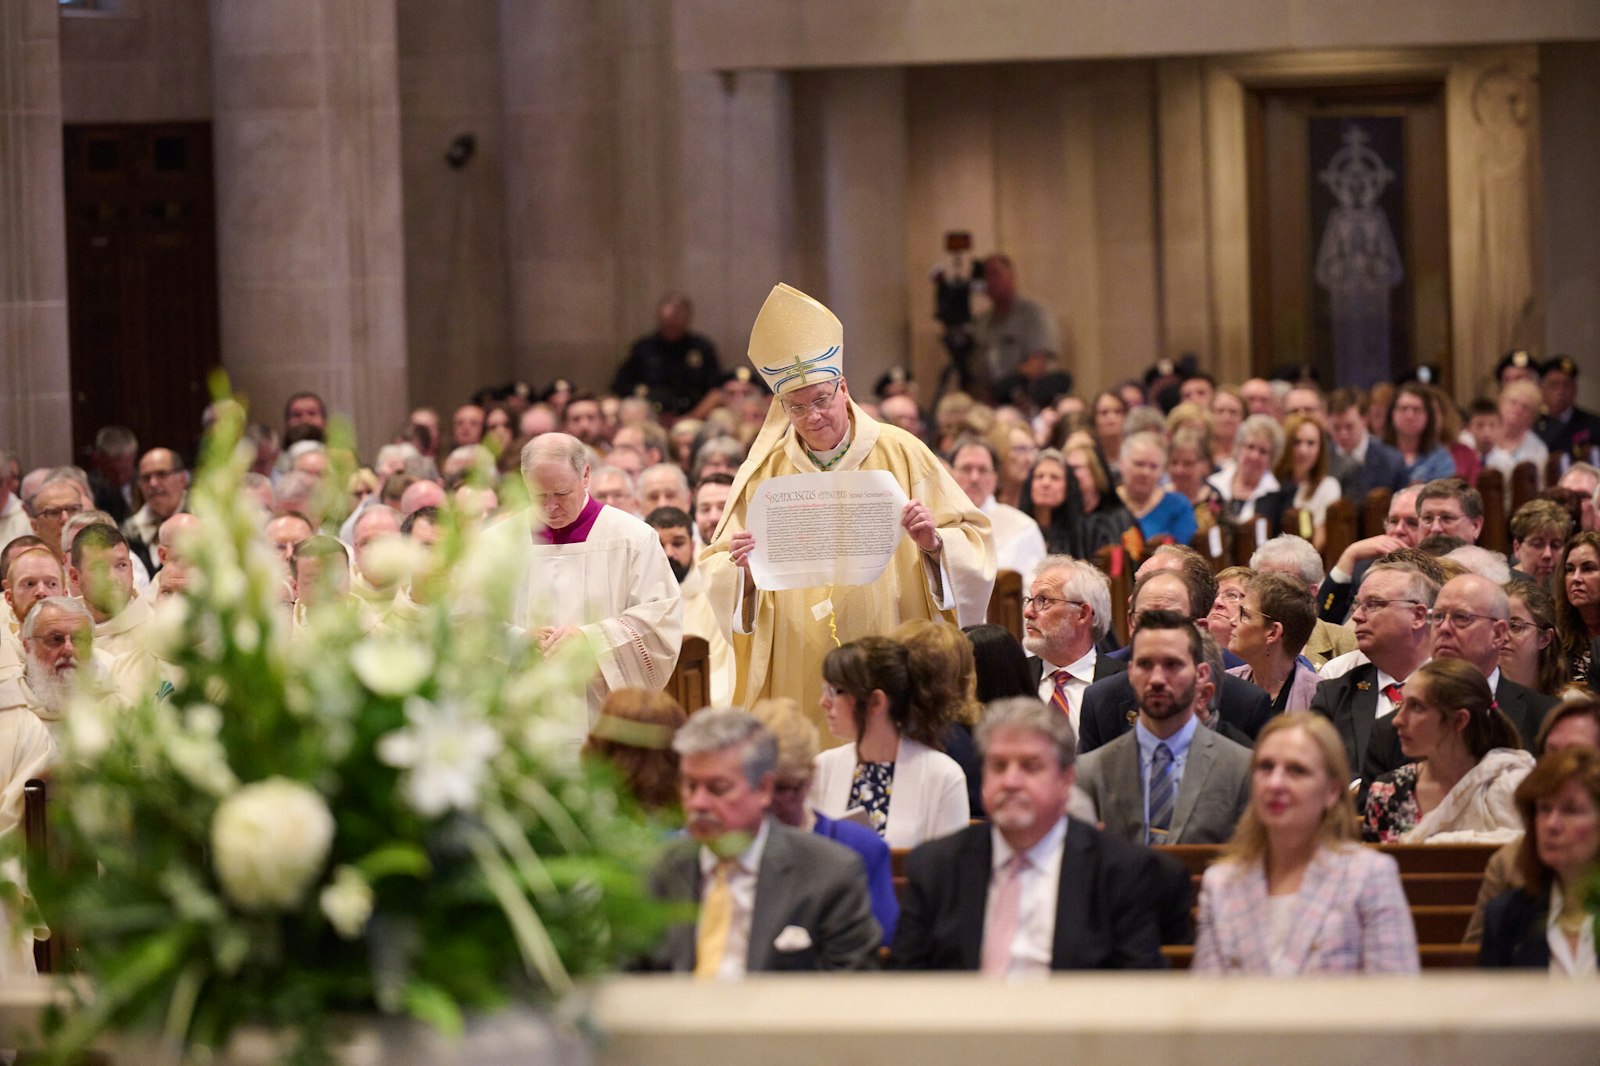 Bishop Battersby processes through the Cathedral of St. Joseph the Workman holding the apostolic mandate from Pope Francis announcing his appointment as the 11th bishop of La Crosse.